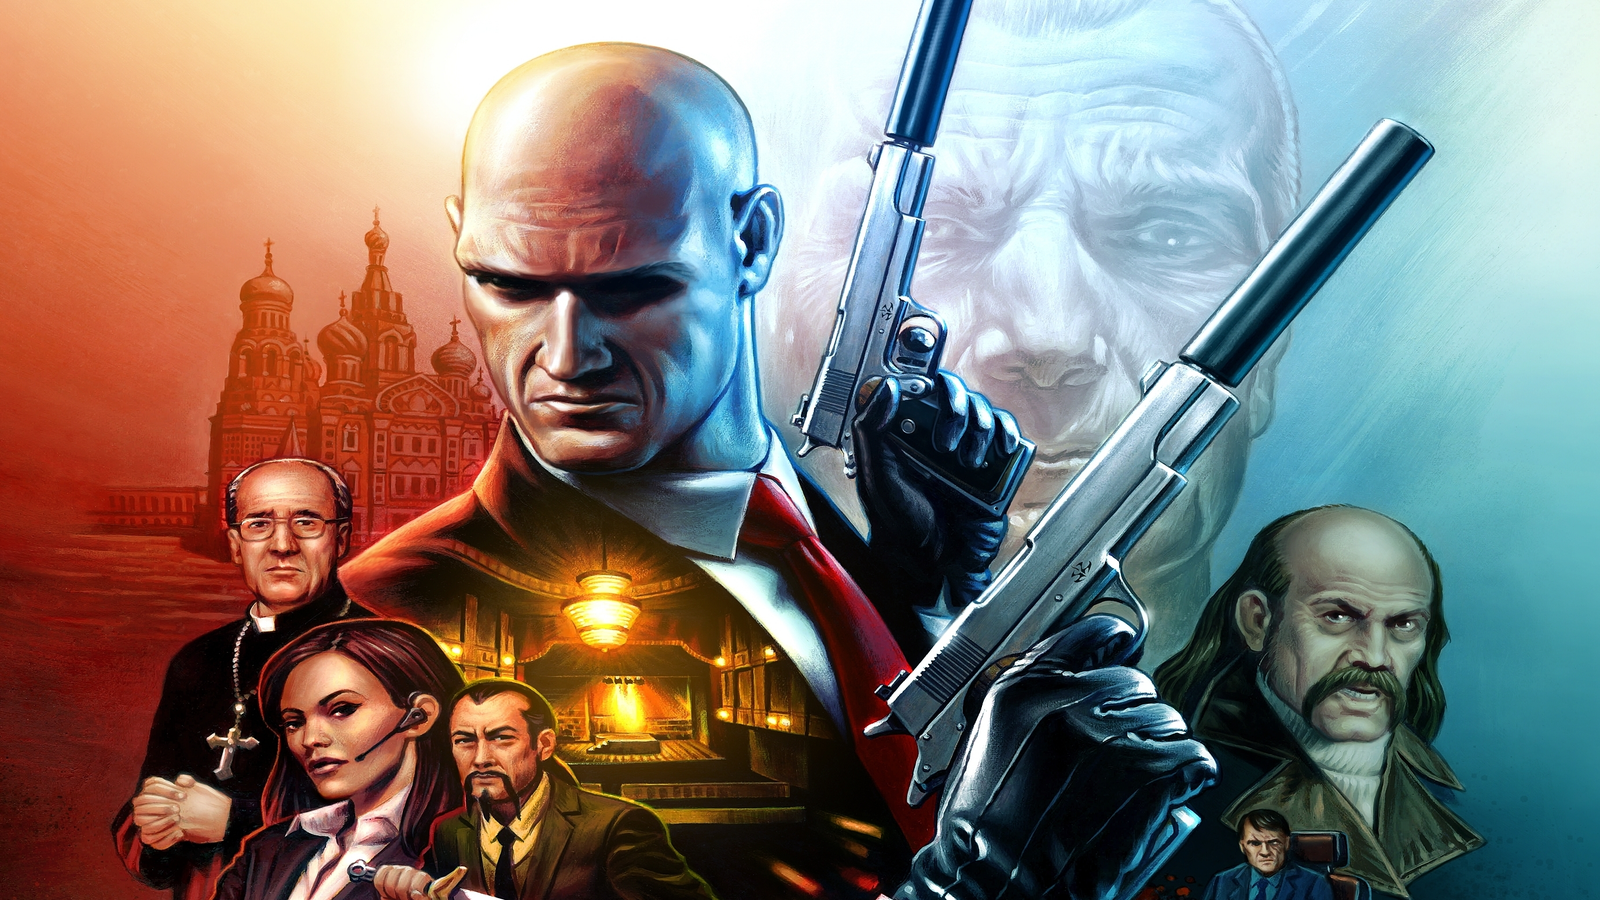 Video game review: 'Hitman 3' closes out World of Assassination trilogy in  fun fashion